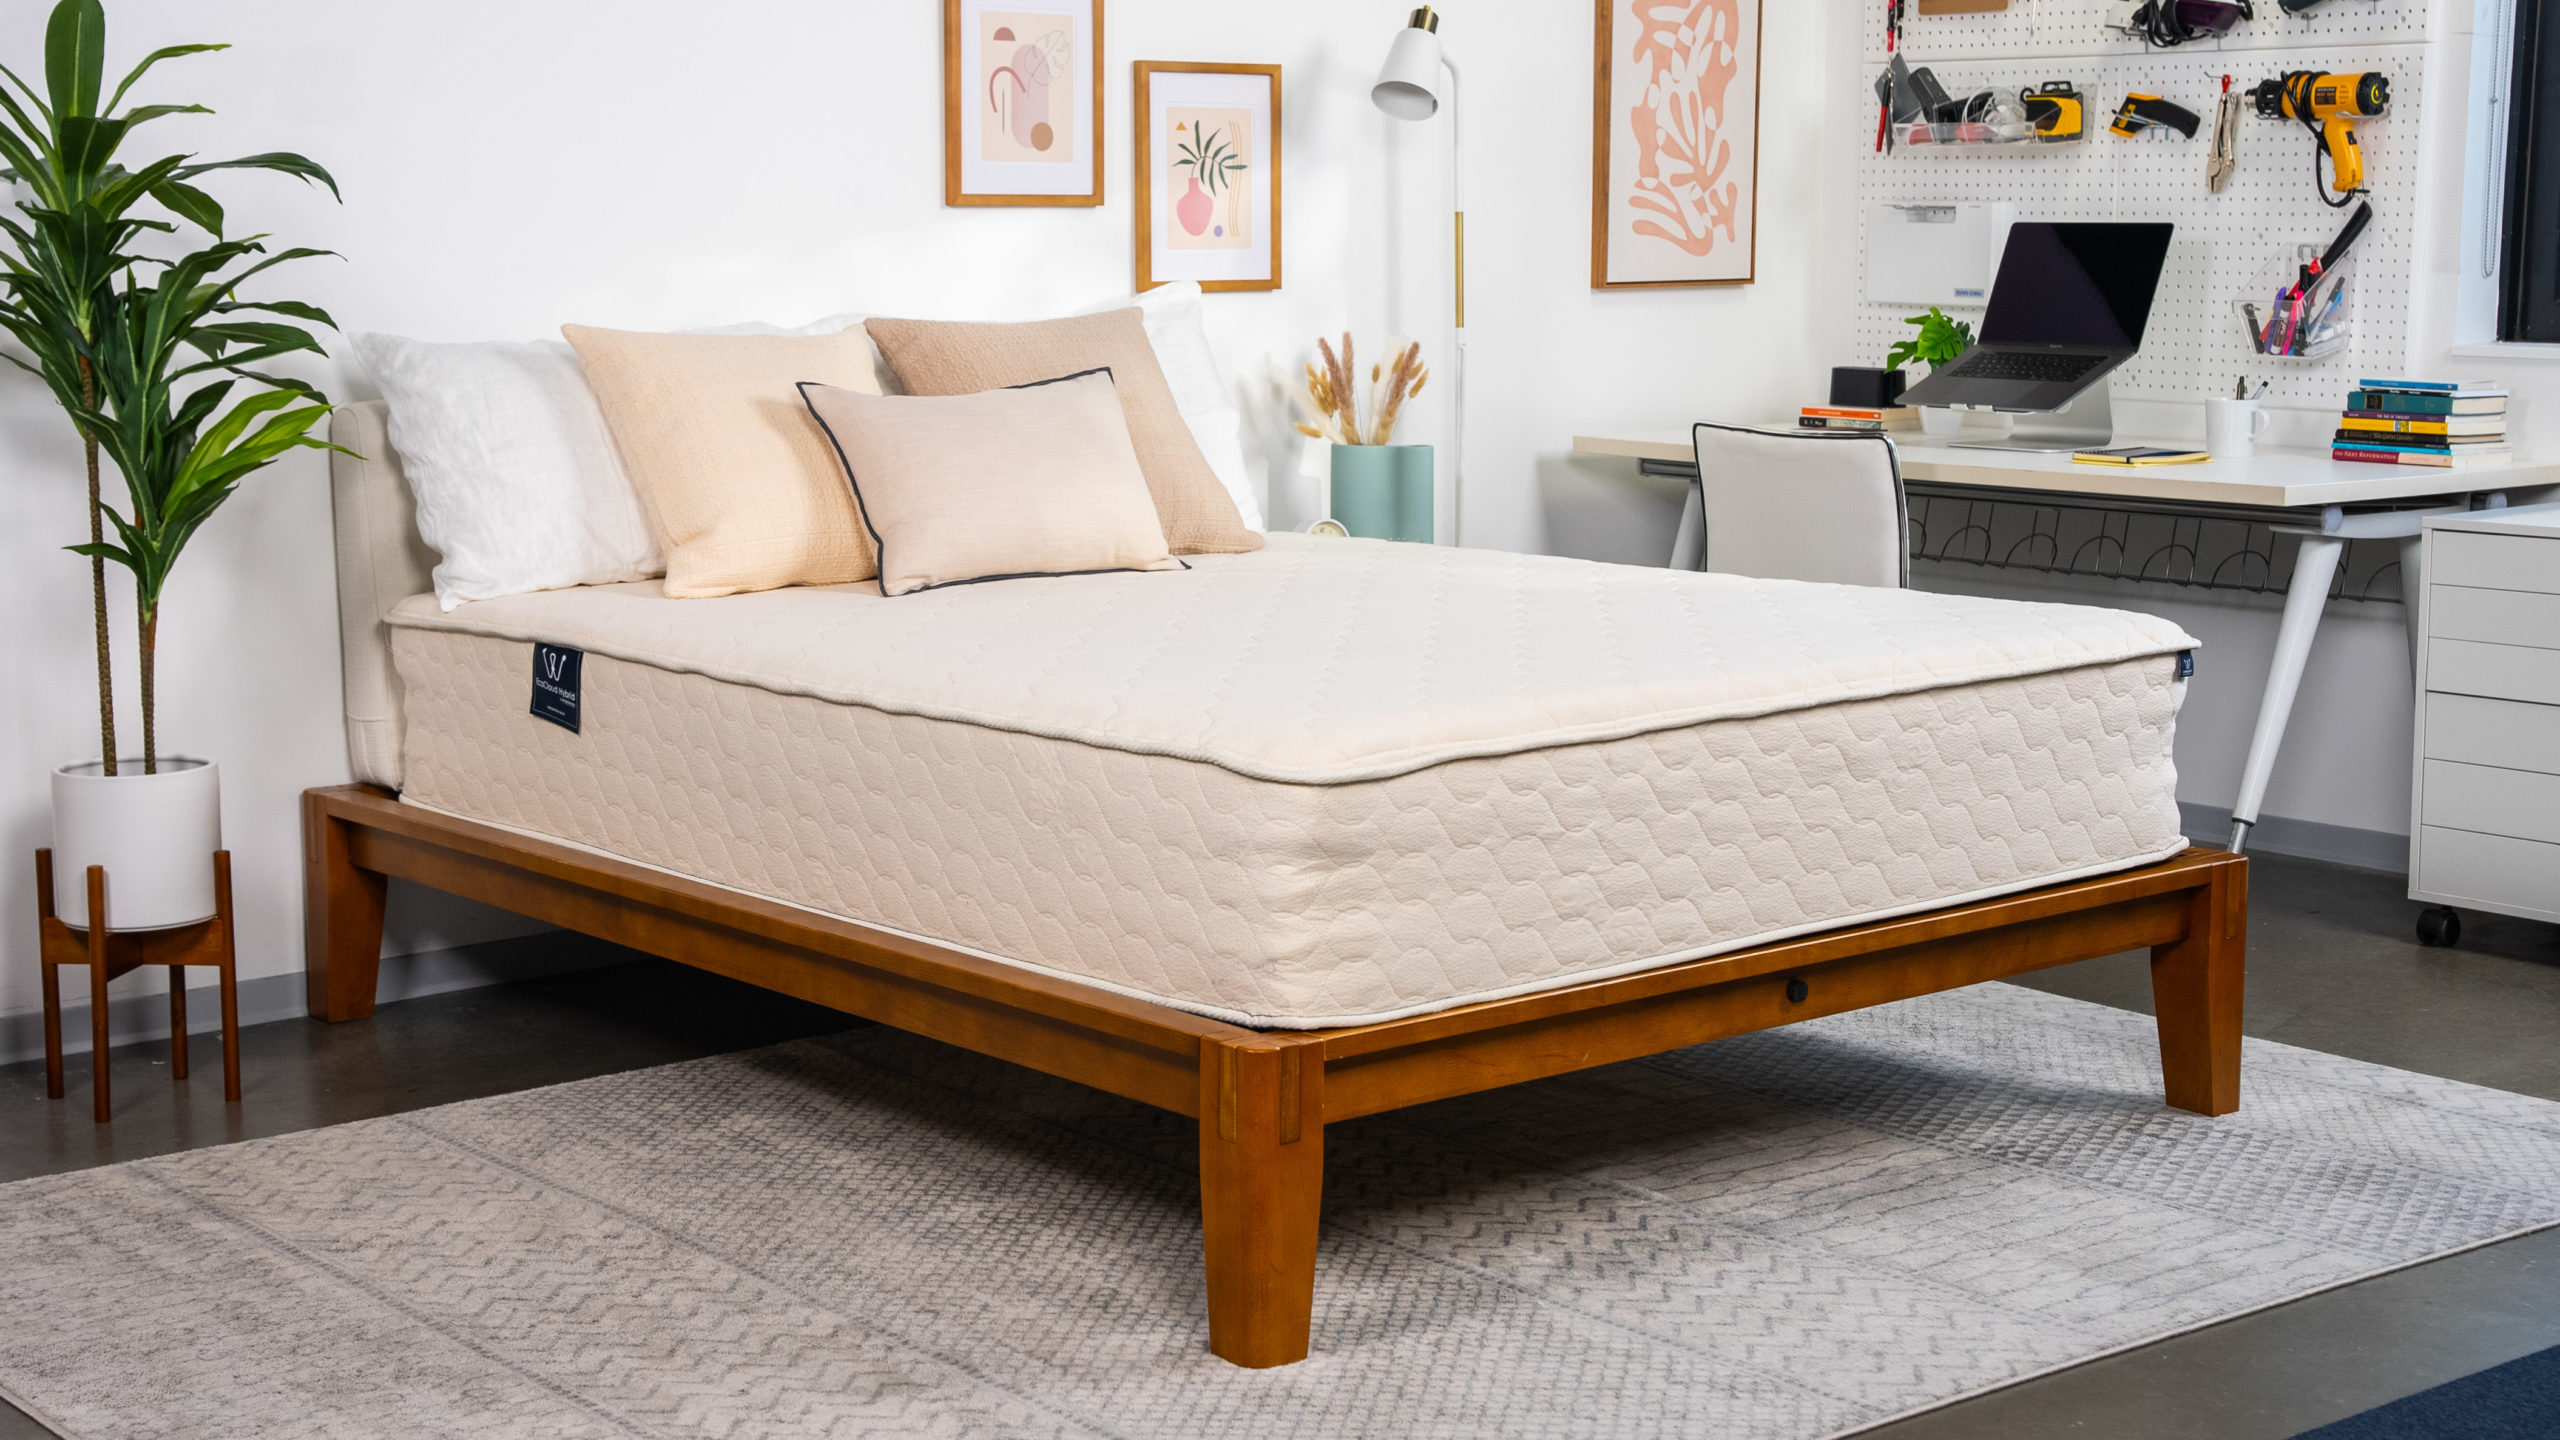 Tips For Extending The Life Of A Latex Mattress